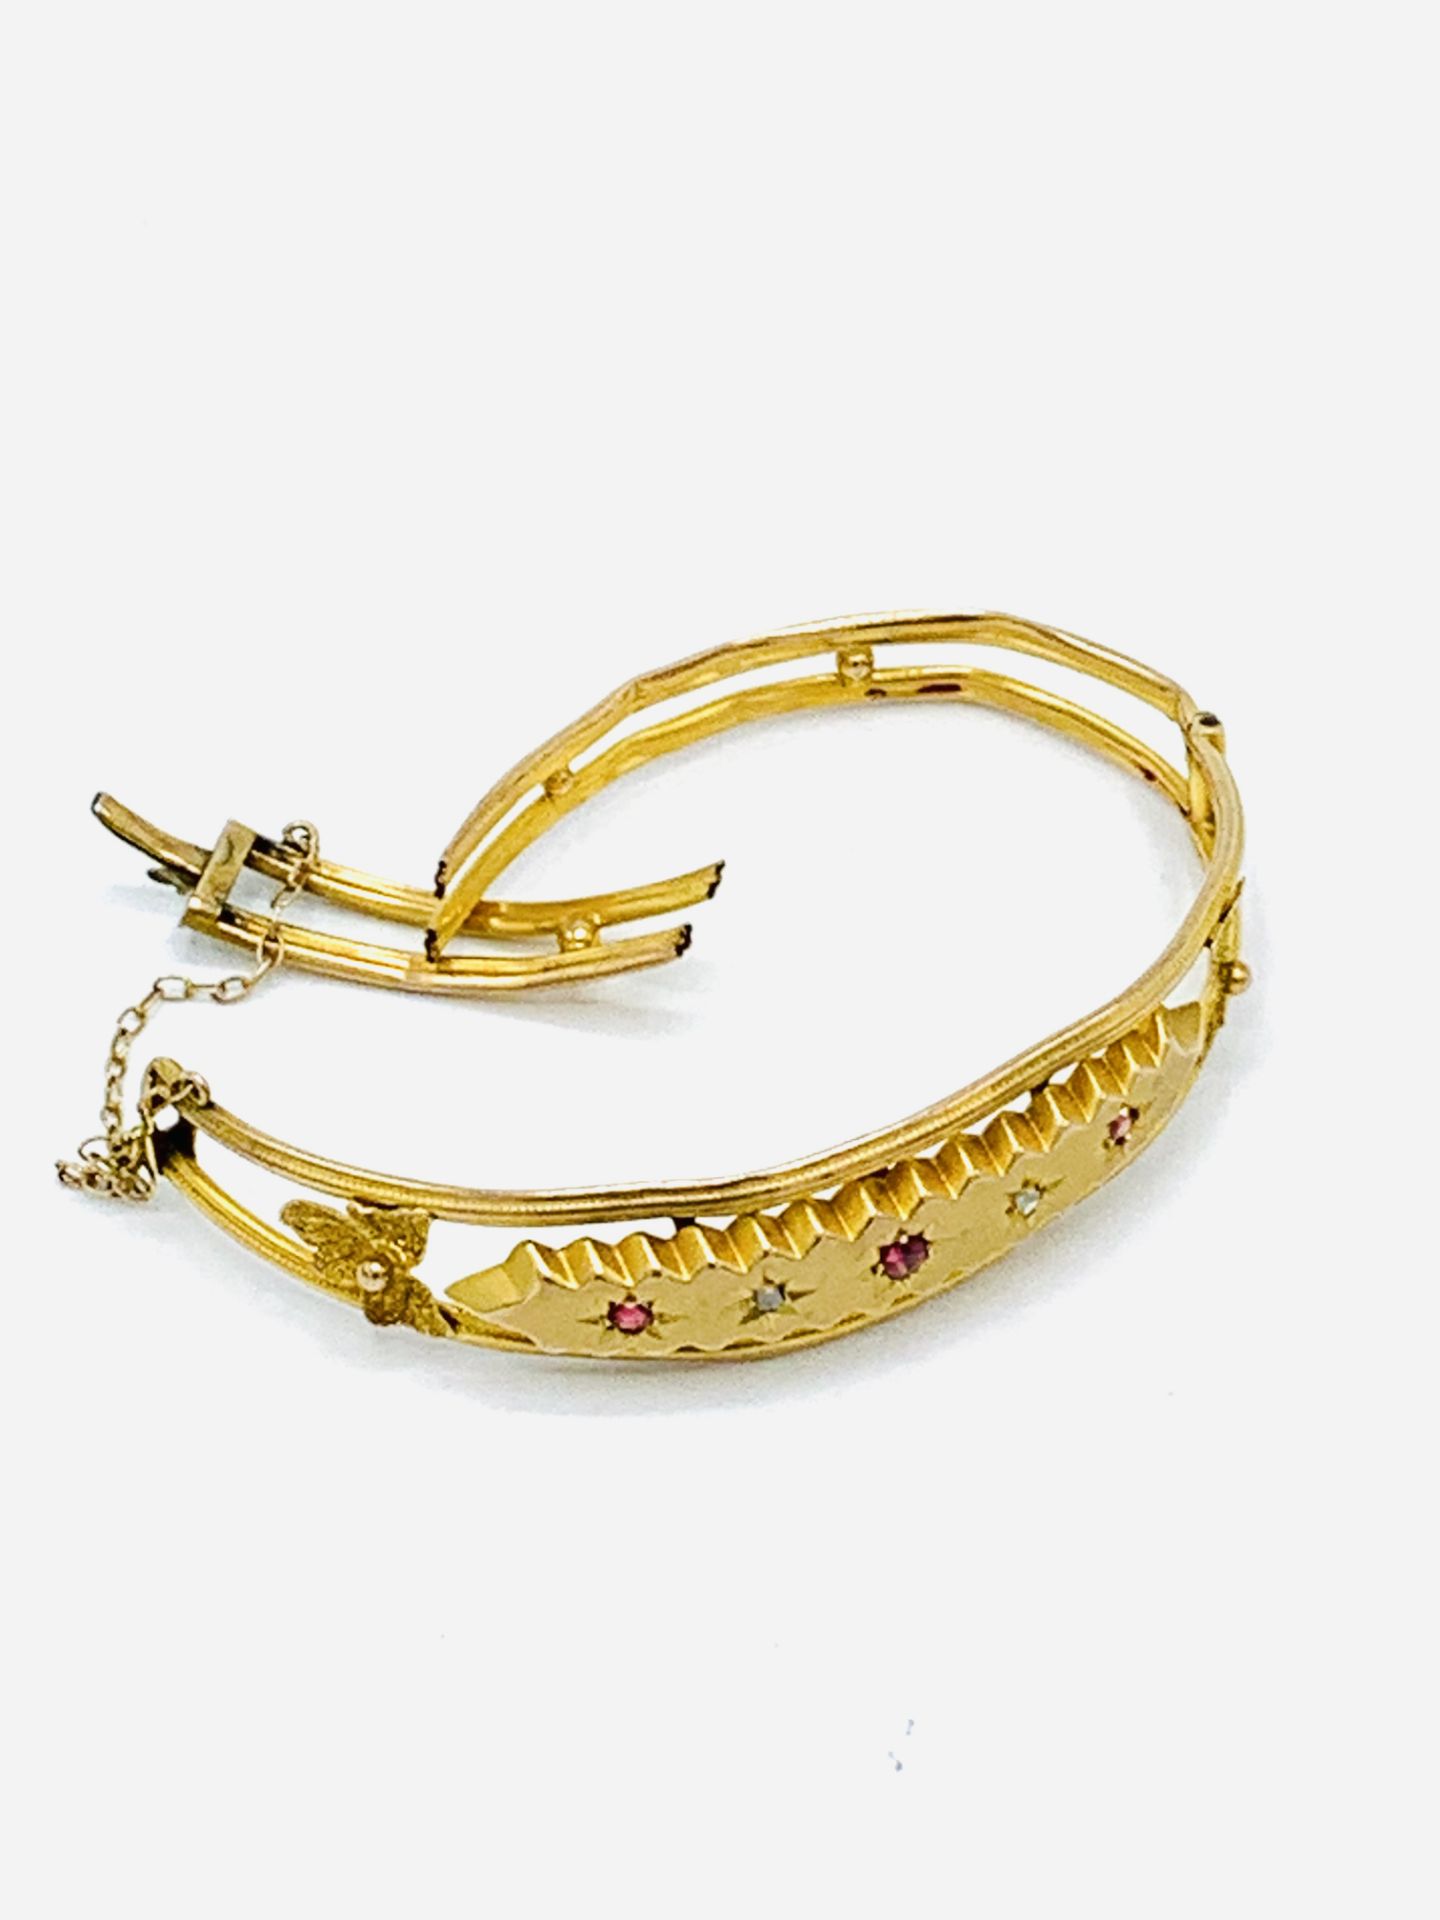 9ct gold, ruby and diamond bracelet together with a pair of 9ct gold earrings. - Image 4 of 4